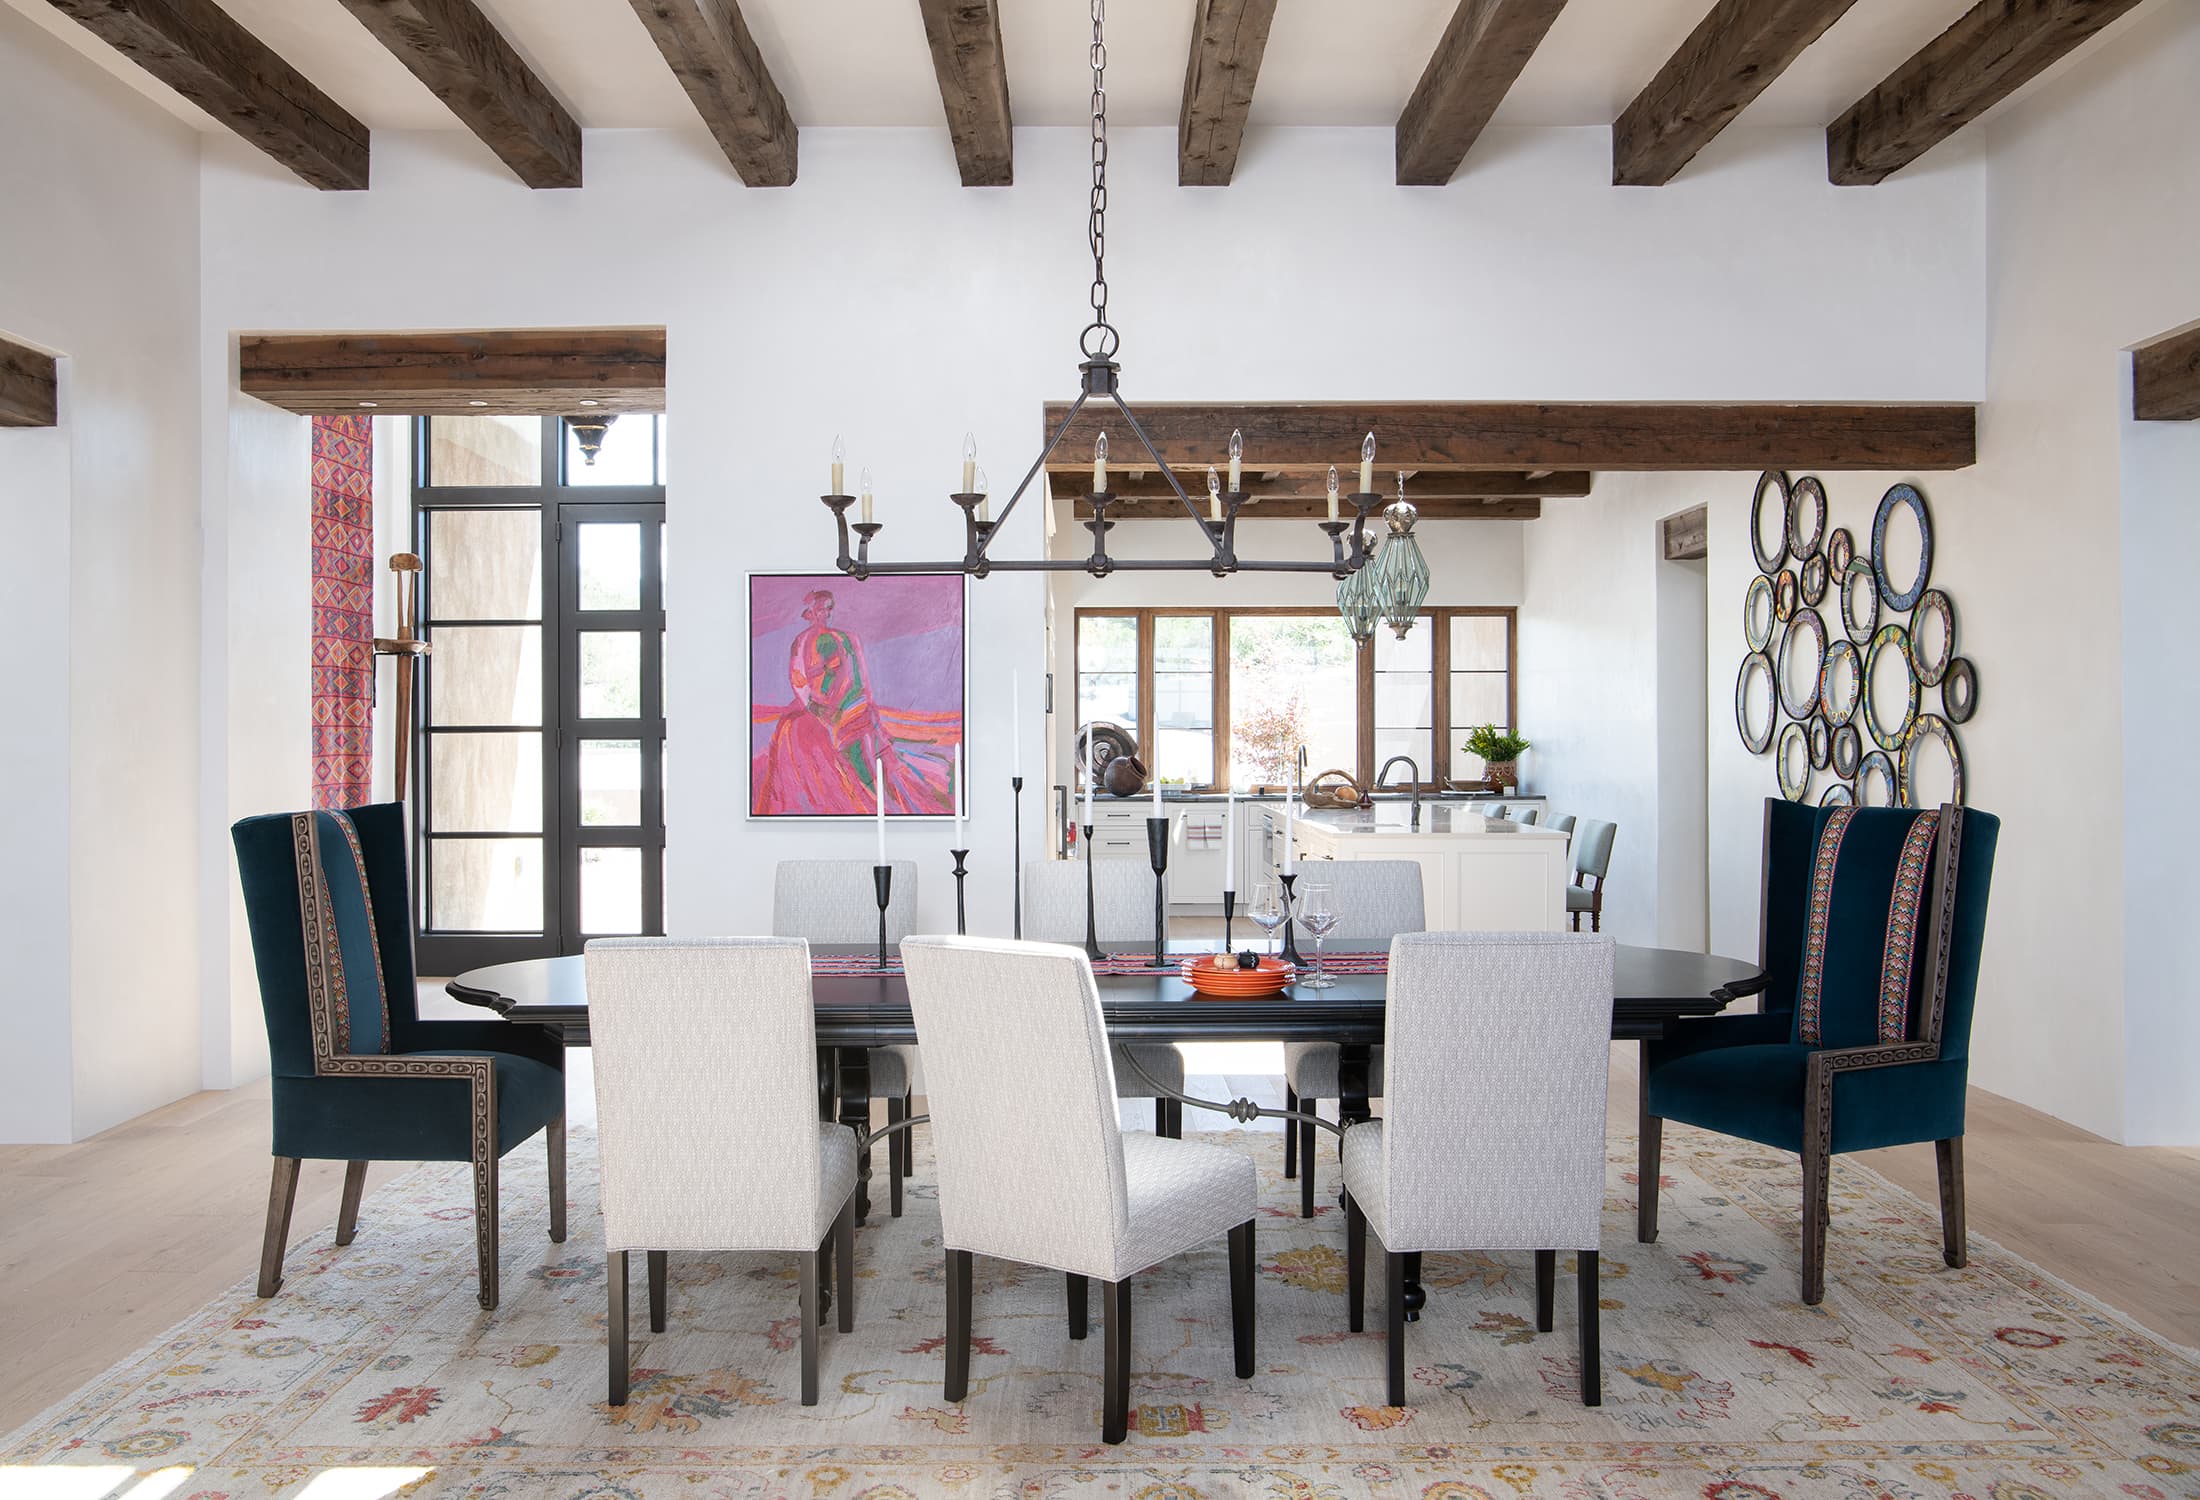 A view of the formal dining room at our Santa Fe project.